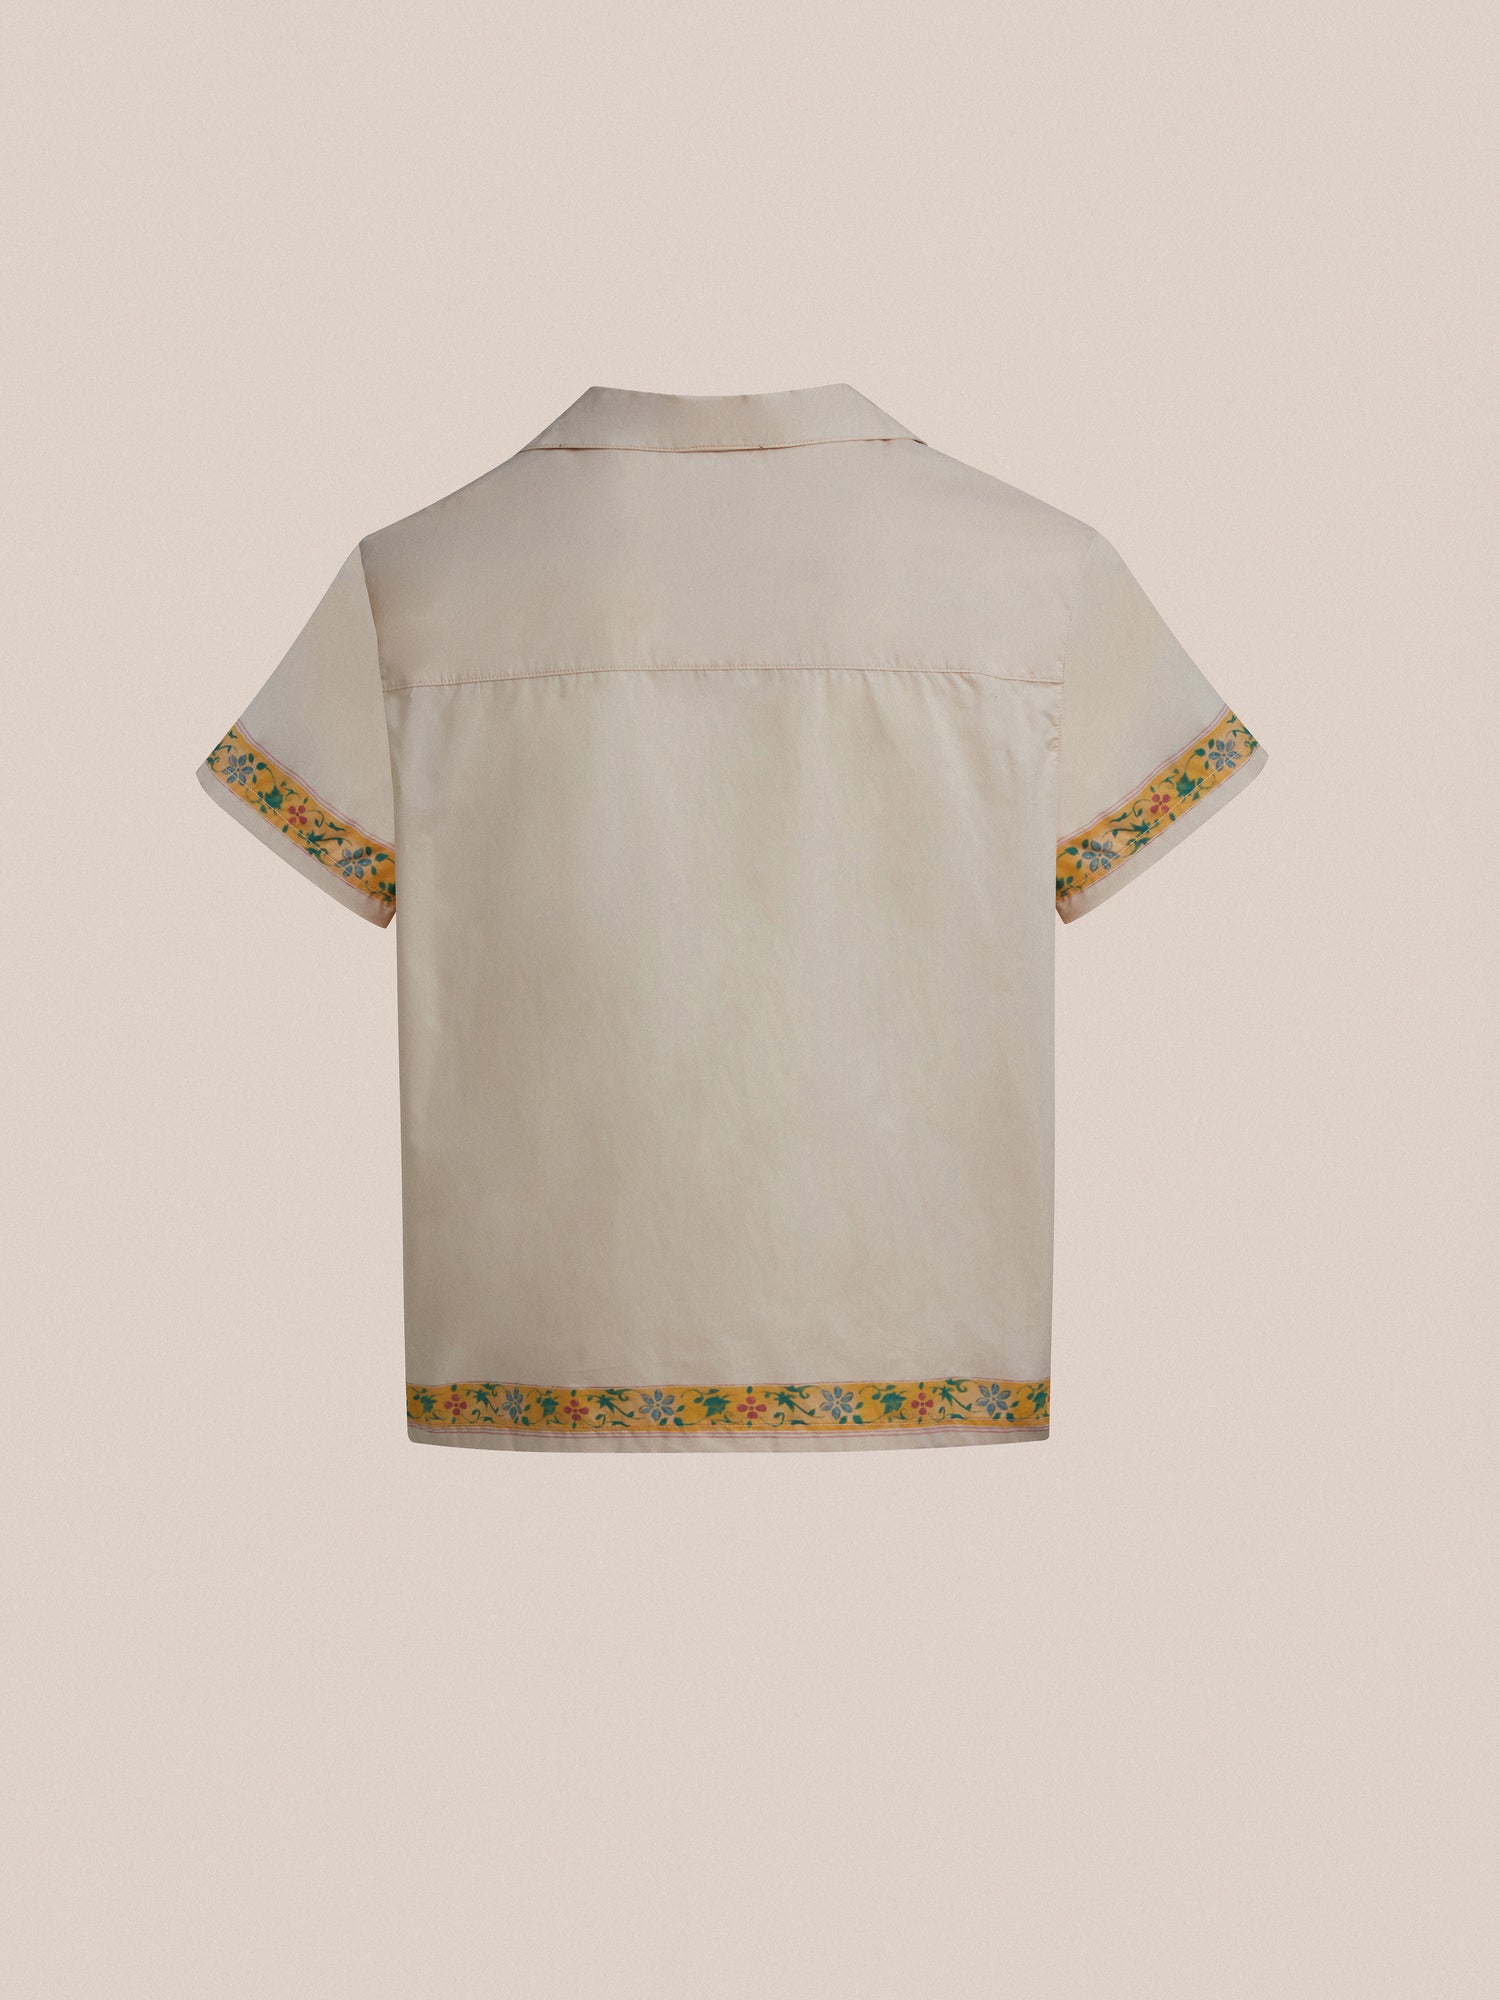 The back of a white Found Moth Camp Shirt with yellow trim.